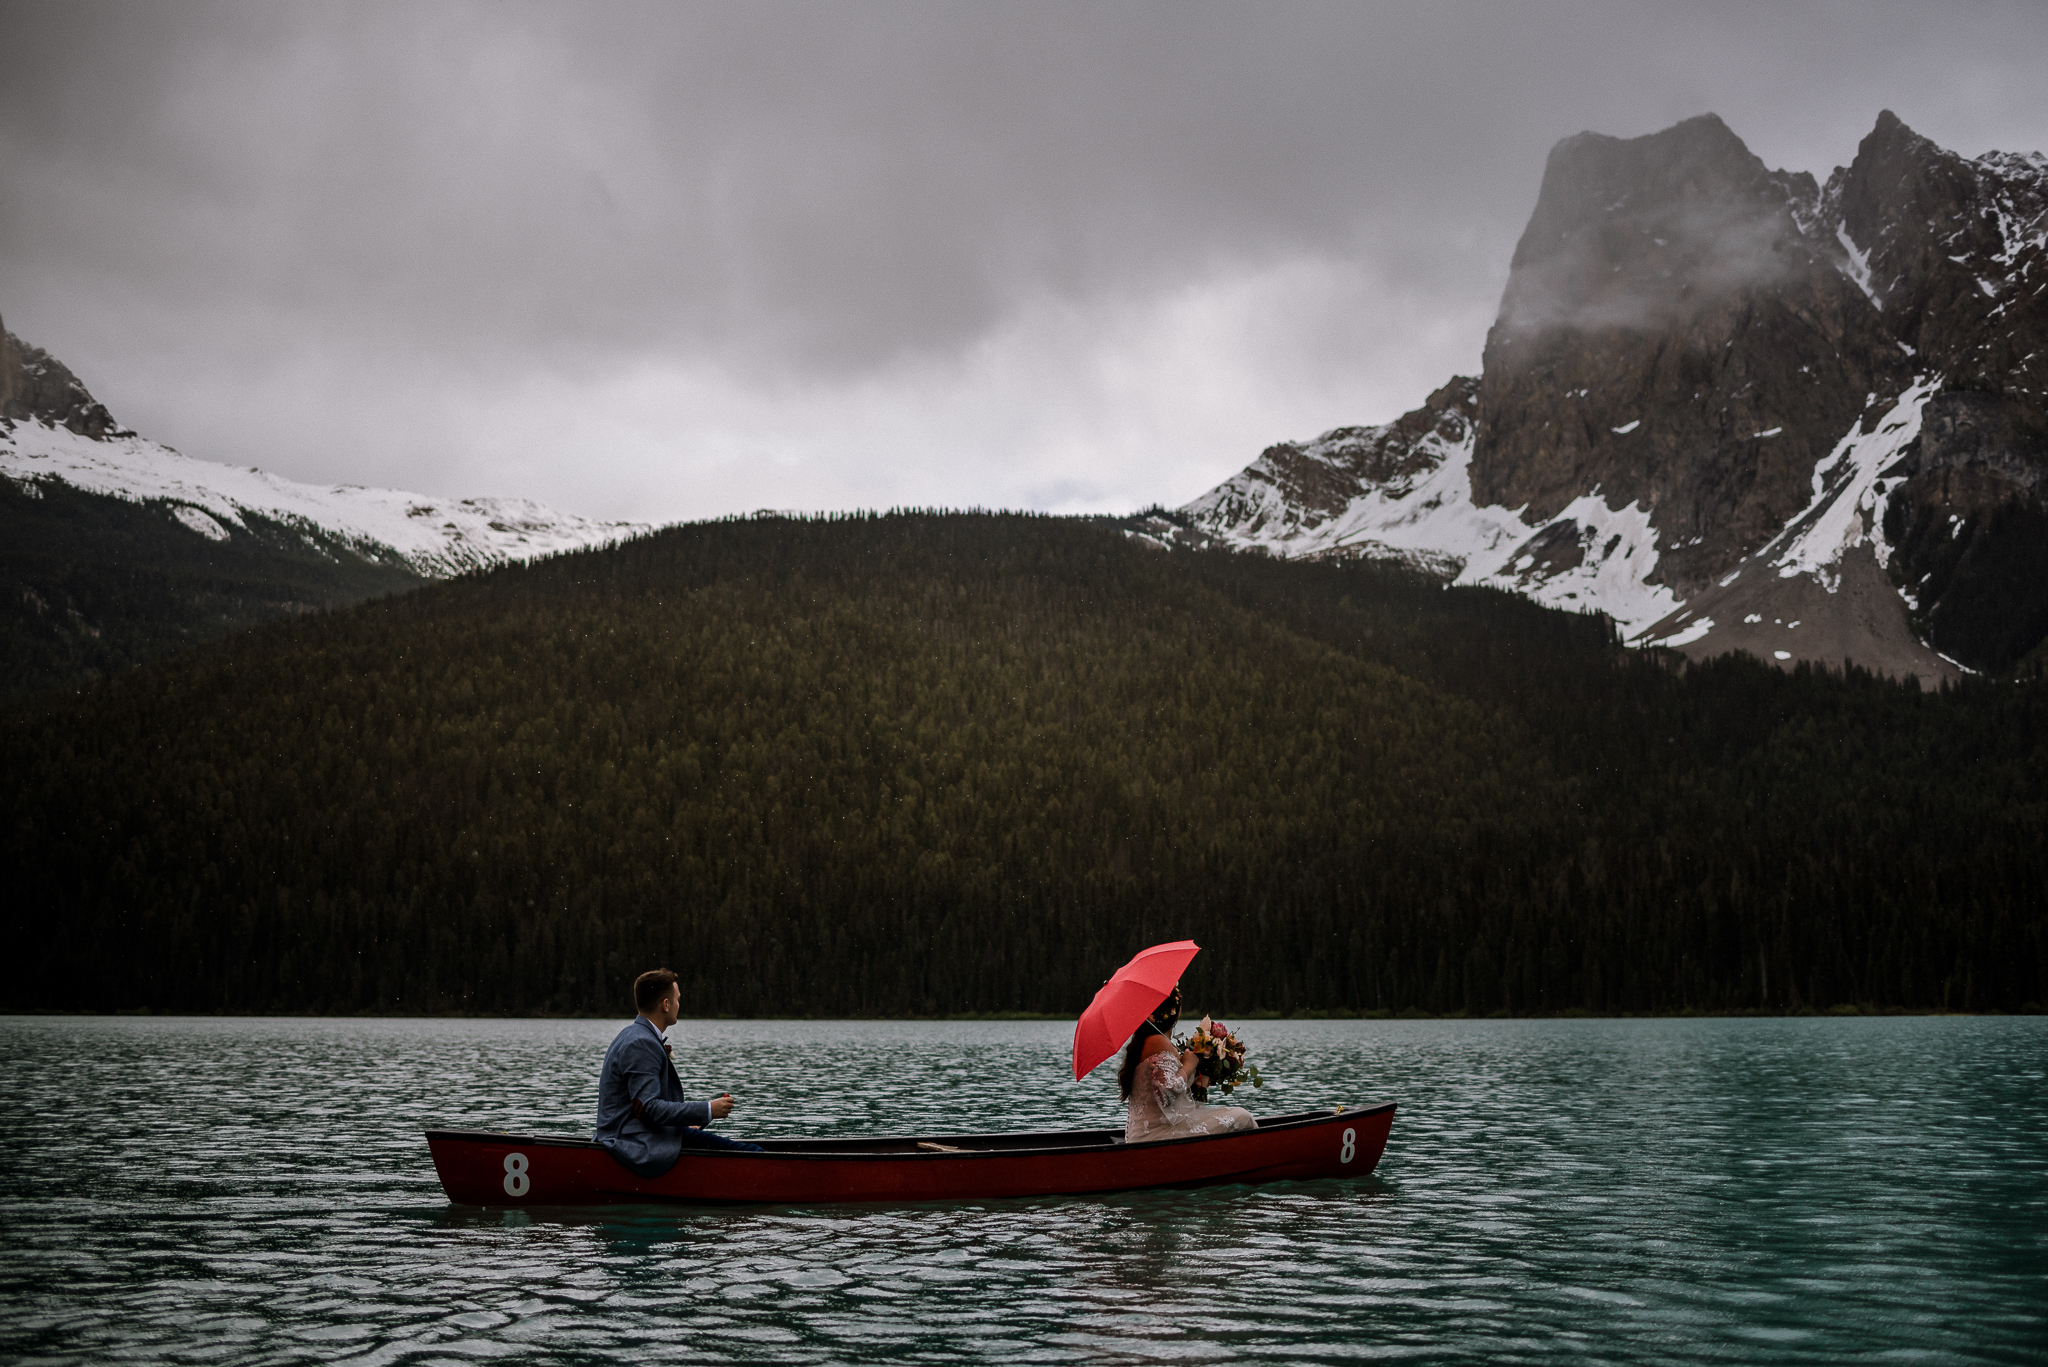 Bride and groom canoeing in the rain at Emerald Lake, BC